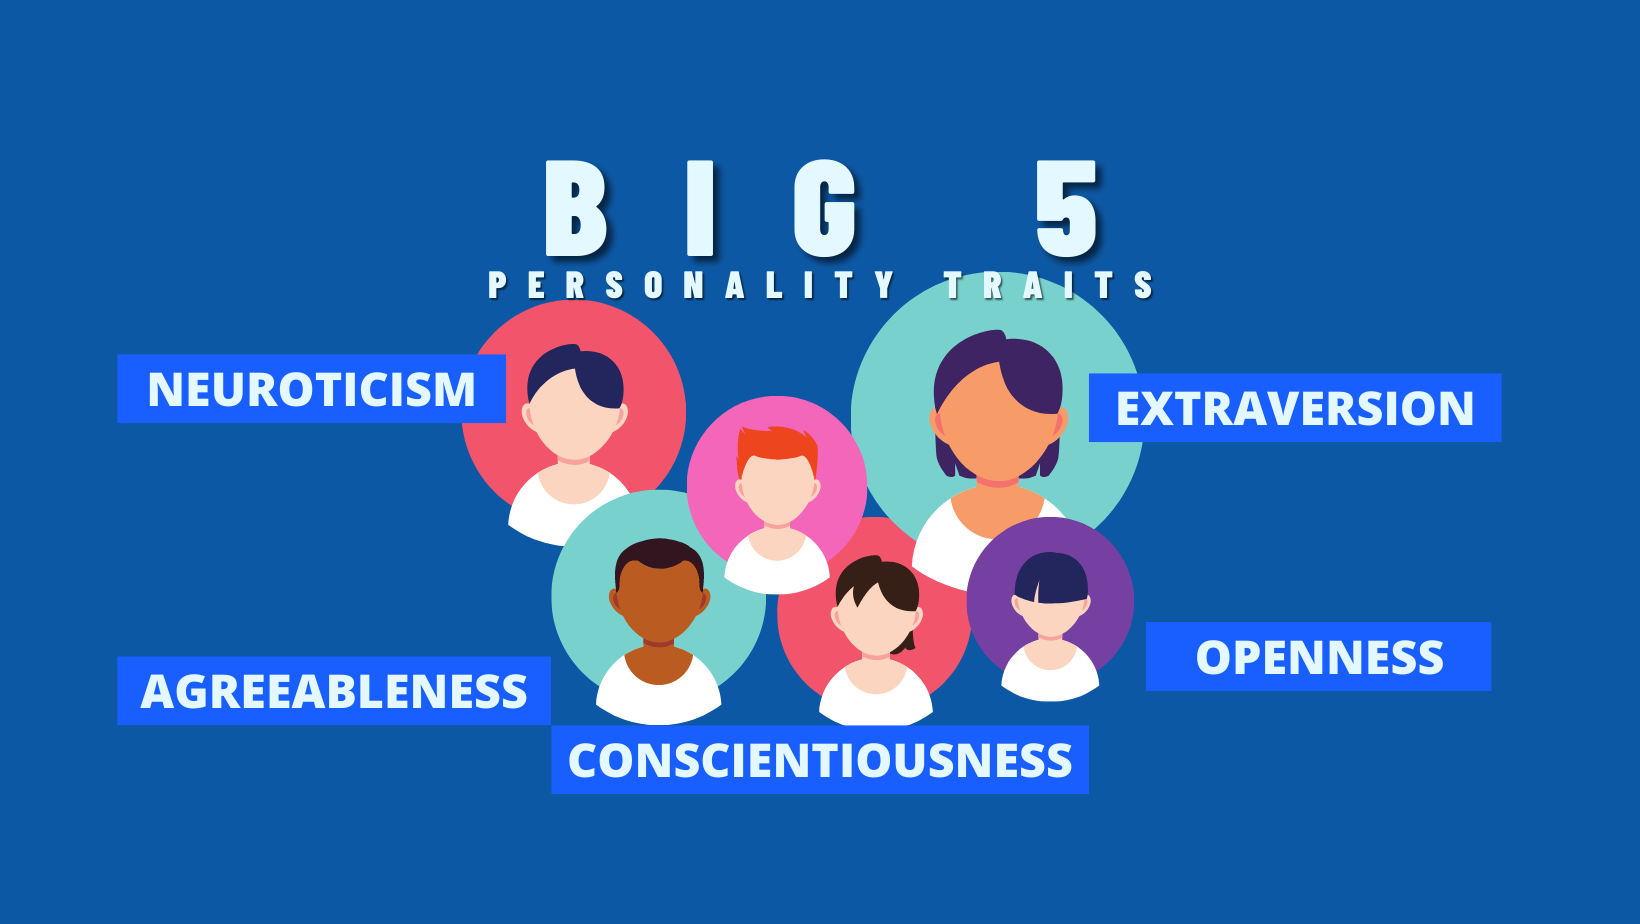 What Are The Big Personality Traits And How Can They Help Me Get The